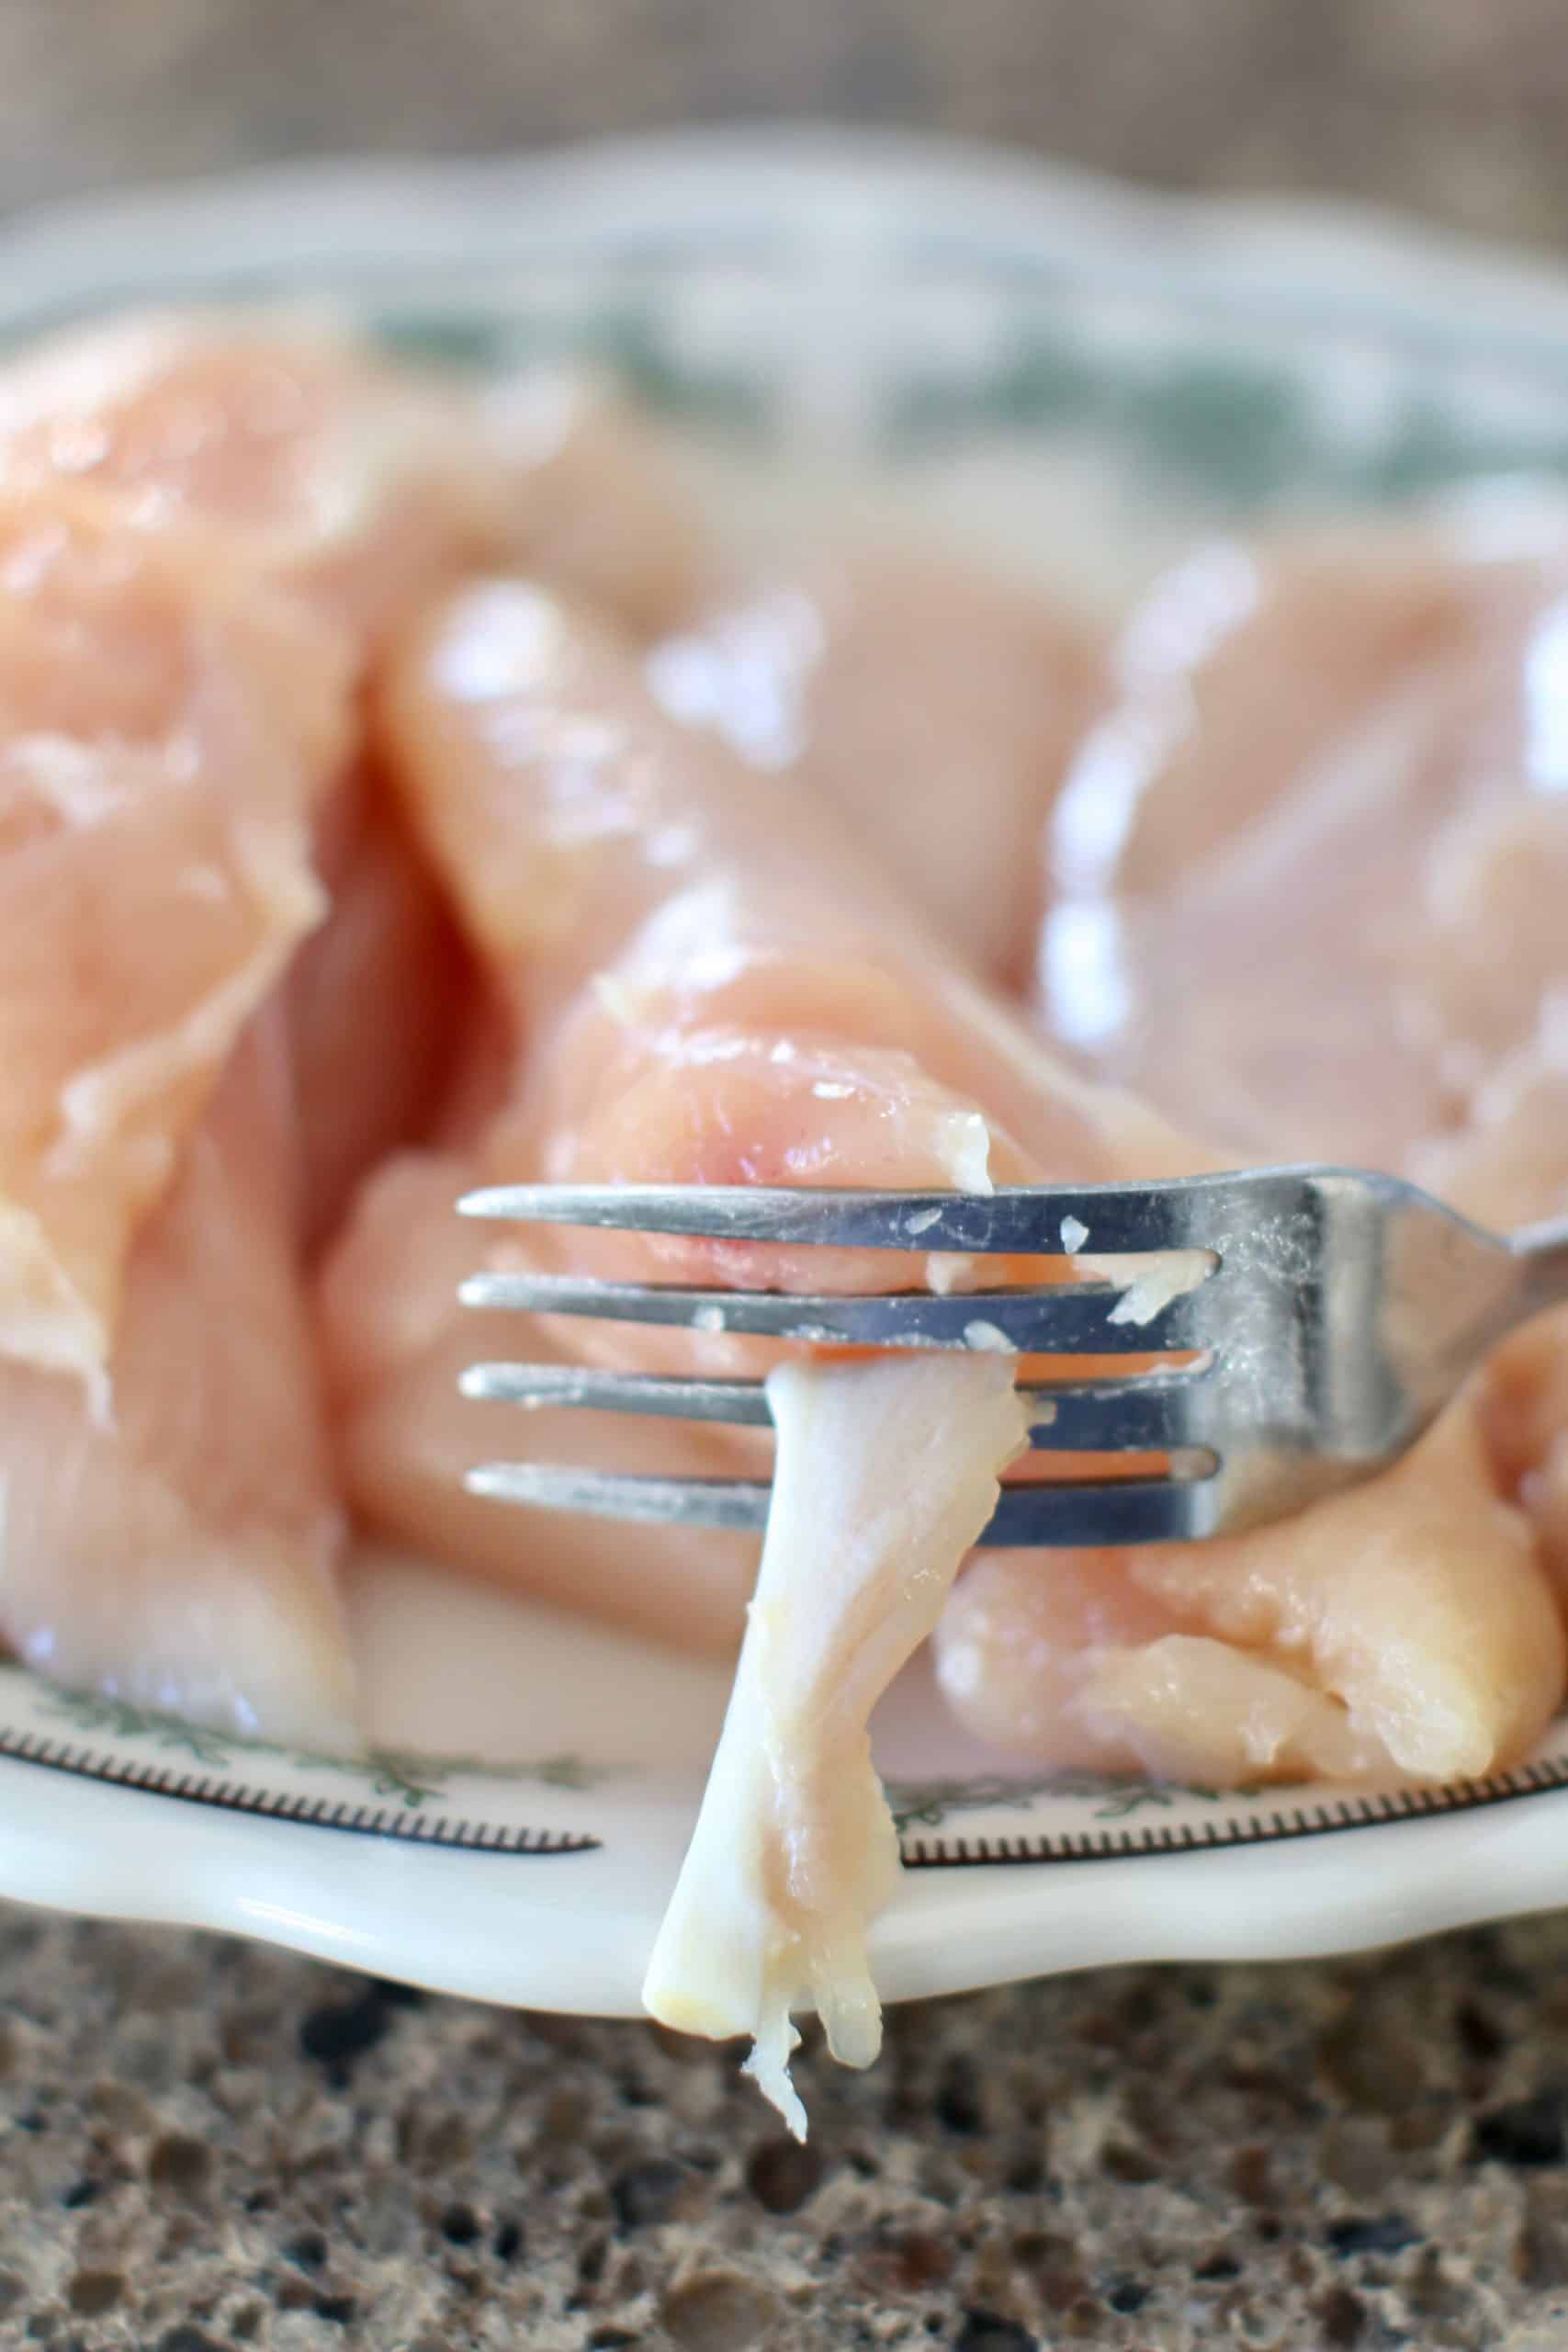 removing cartilage strip from chicken tenderloin with a fork.